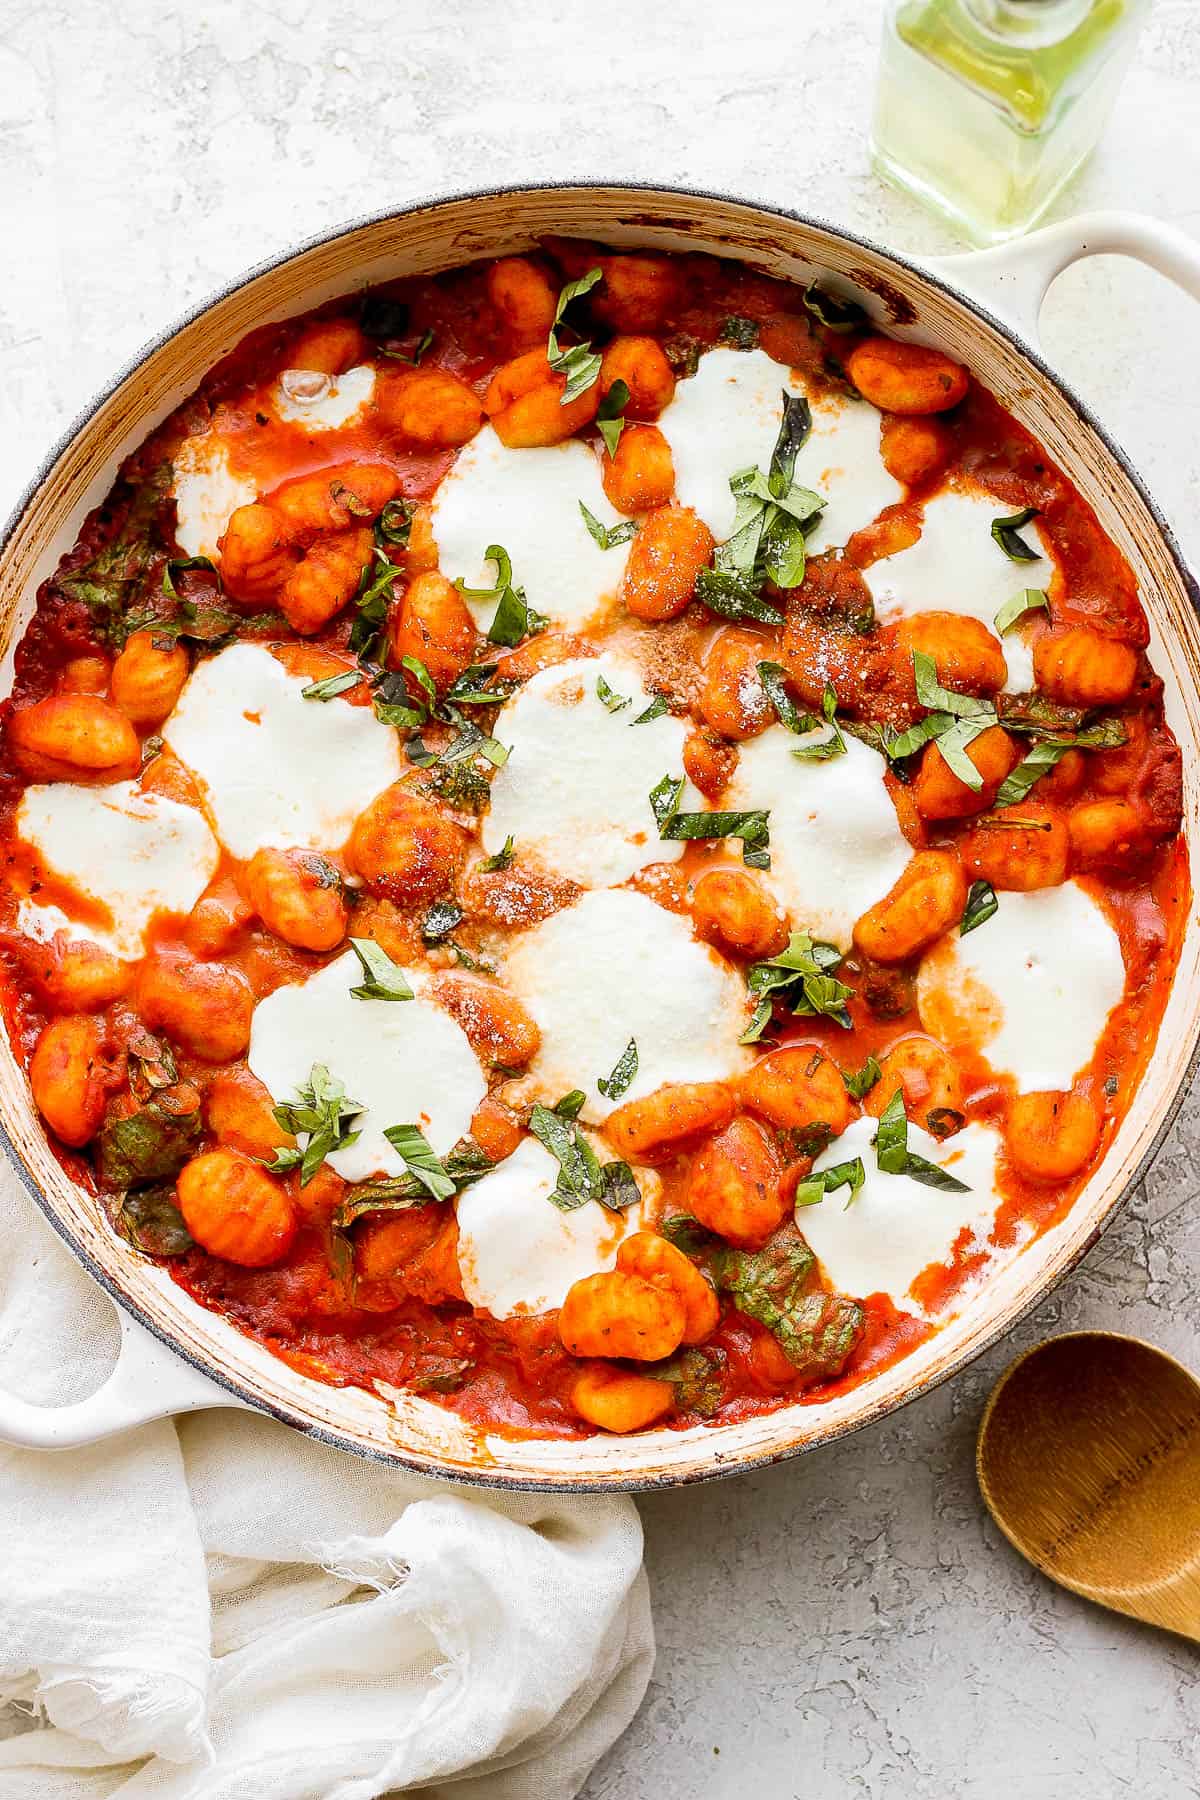 A quick and easy baked gnocchi recipe.